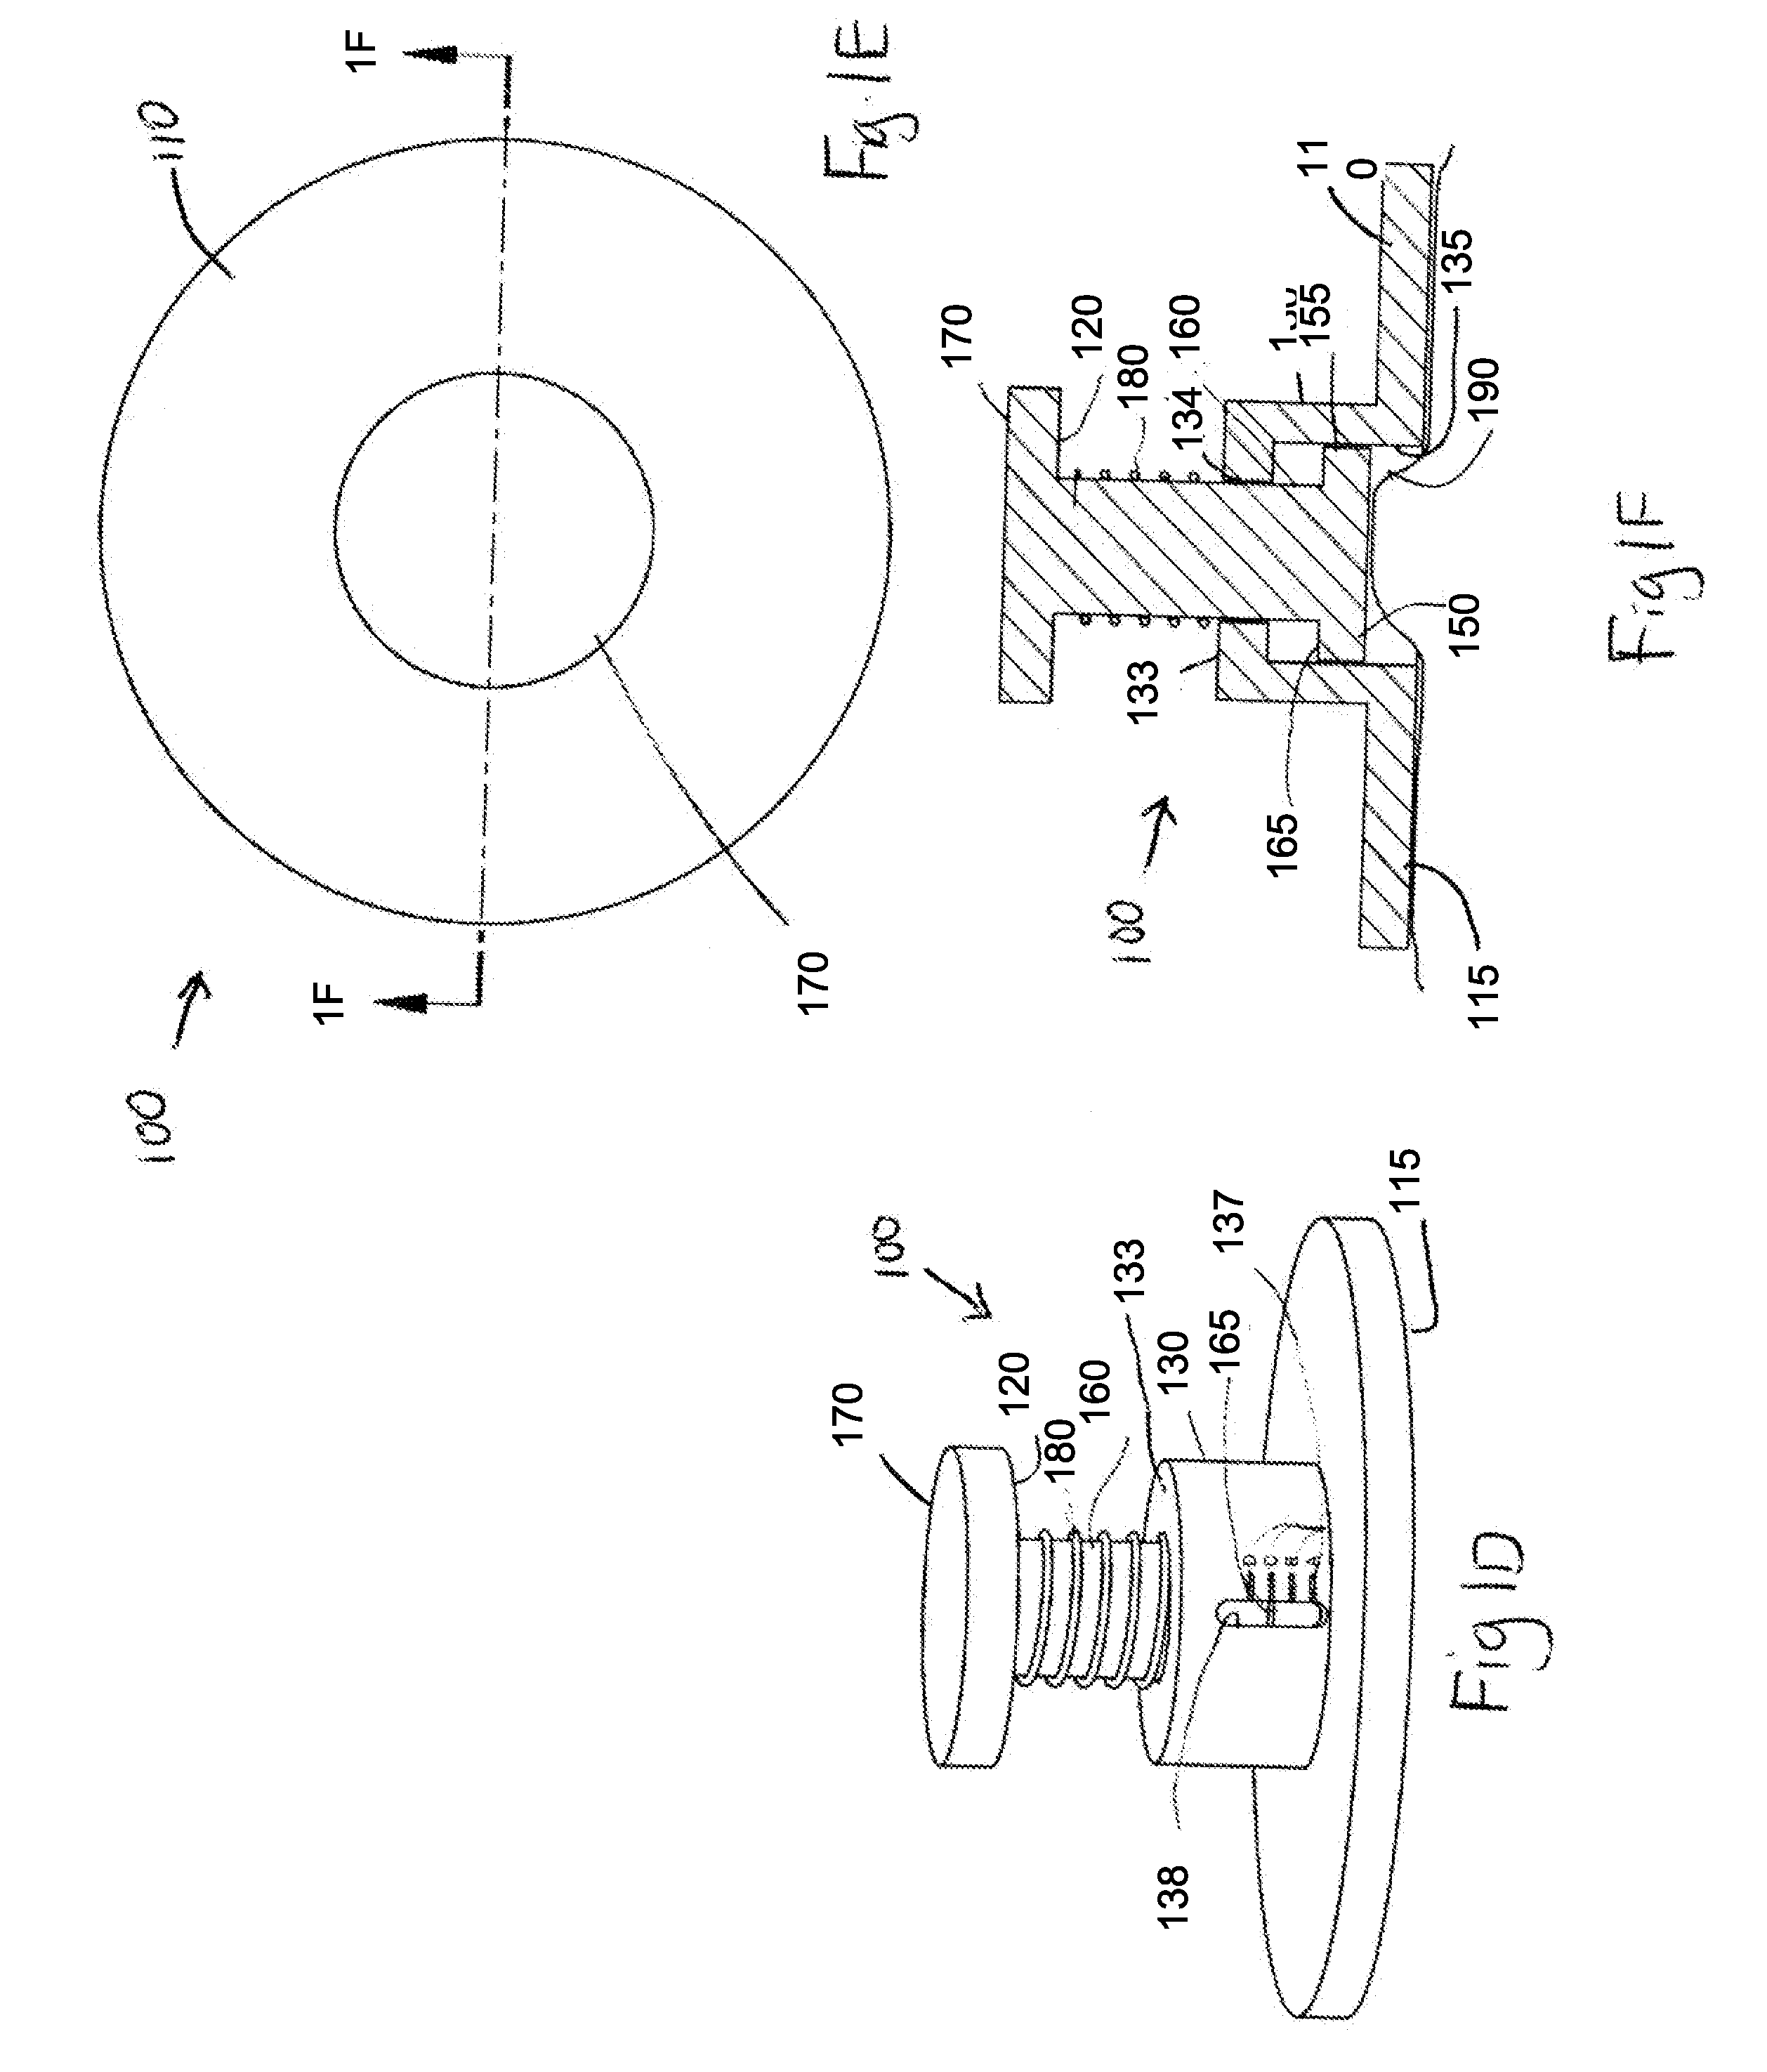 Elastic devices, methods, systems and kits for selecting skin treatment devices